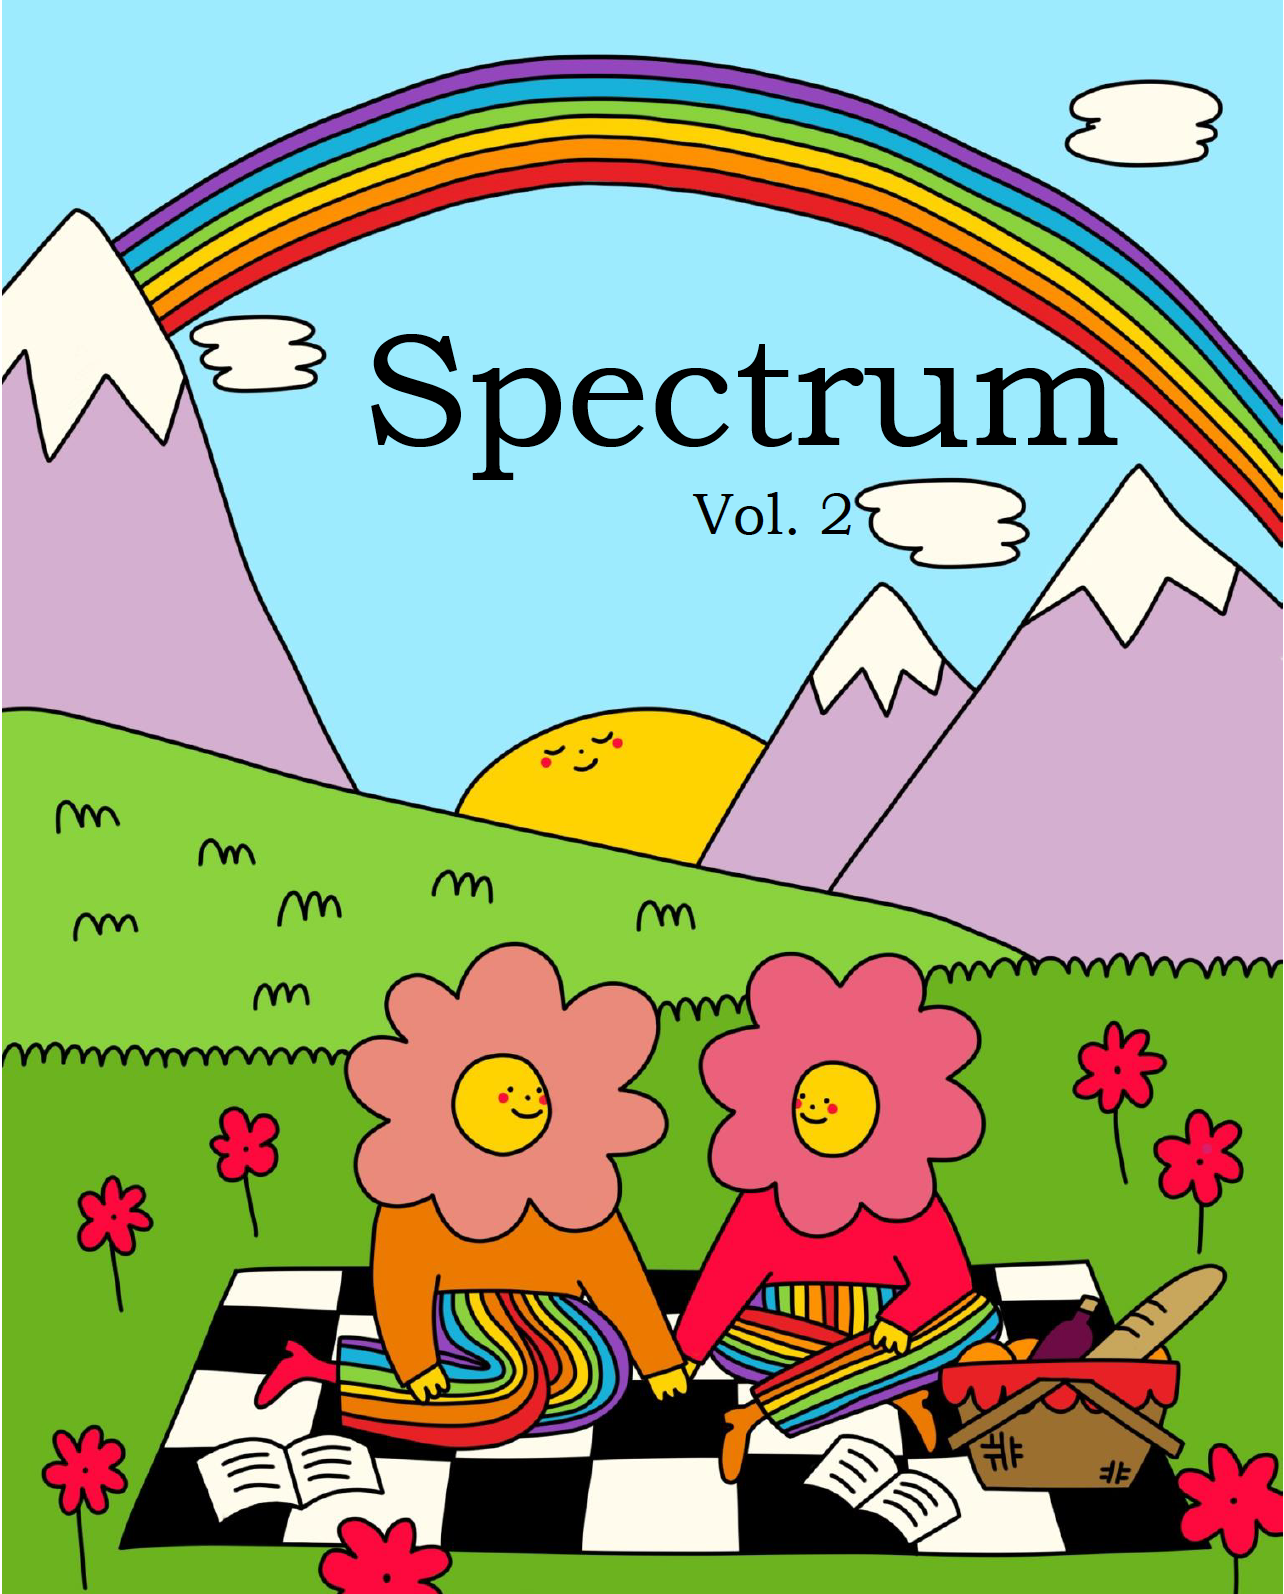 Two peope with rainbow pants and flower heads sit on a checkered picnic blanket. They sit in the foreground; grass, a hill, mountains, a smiling Sun, and a rainbow are in the background. Under the rainbow, the journal title "Spectrum" and "Vol. 2" are written in large black text.